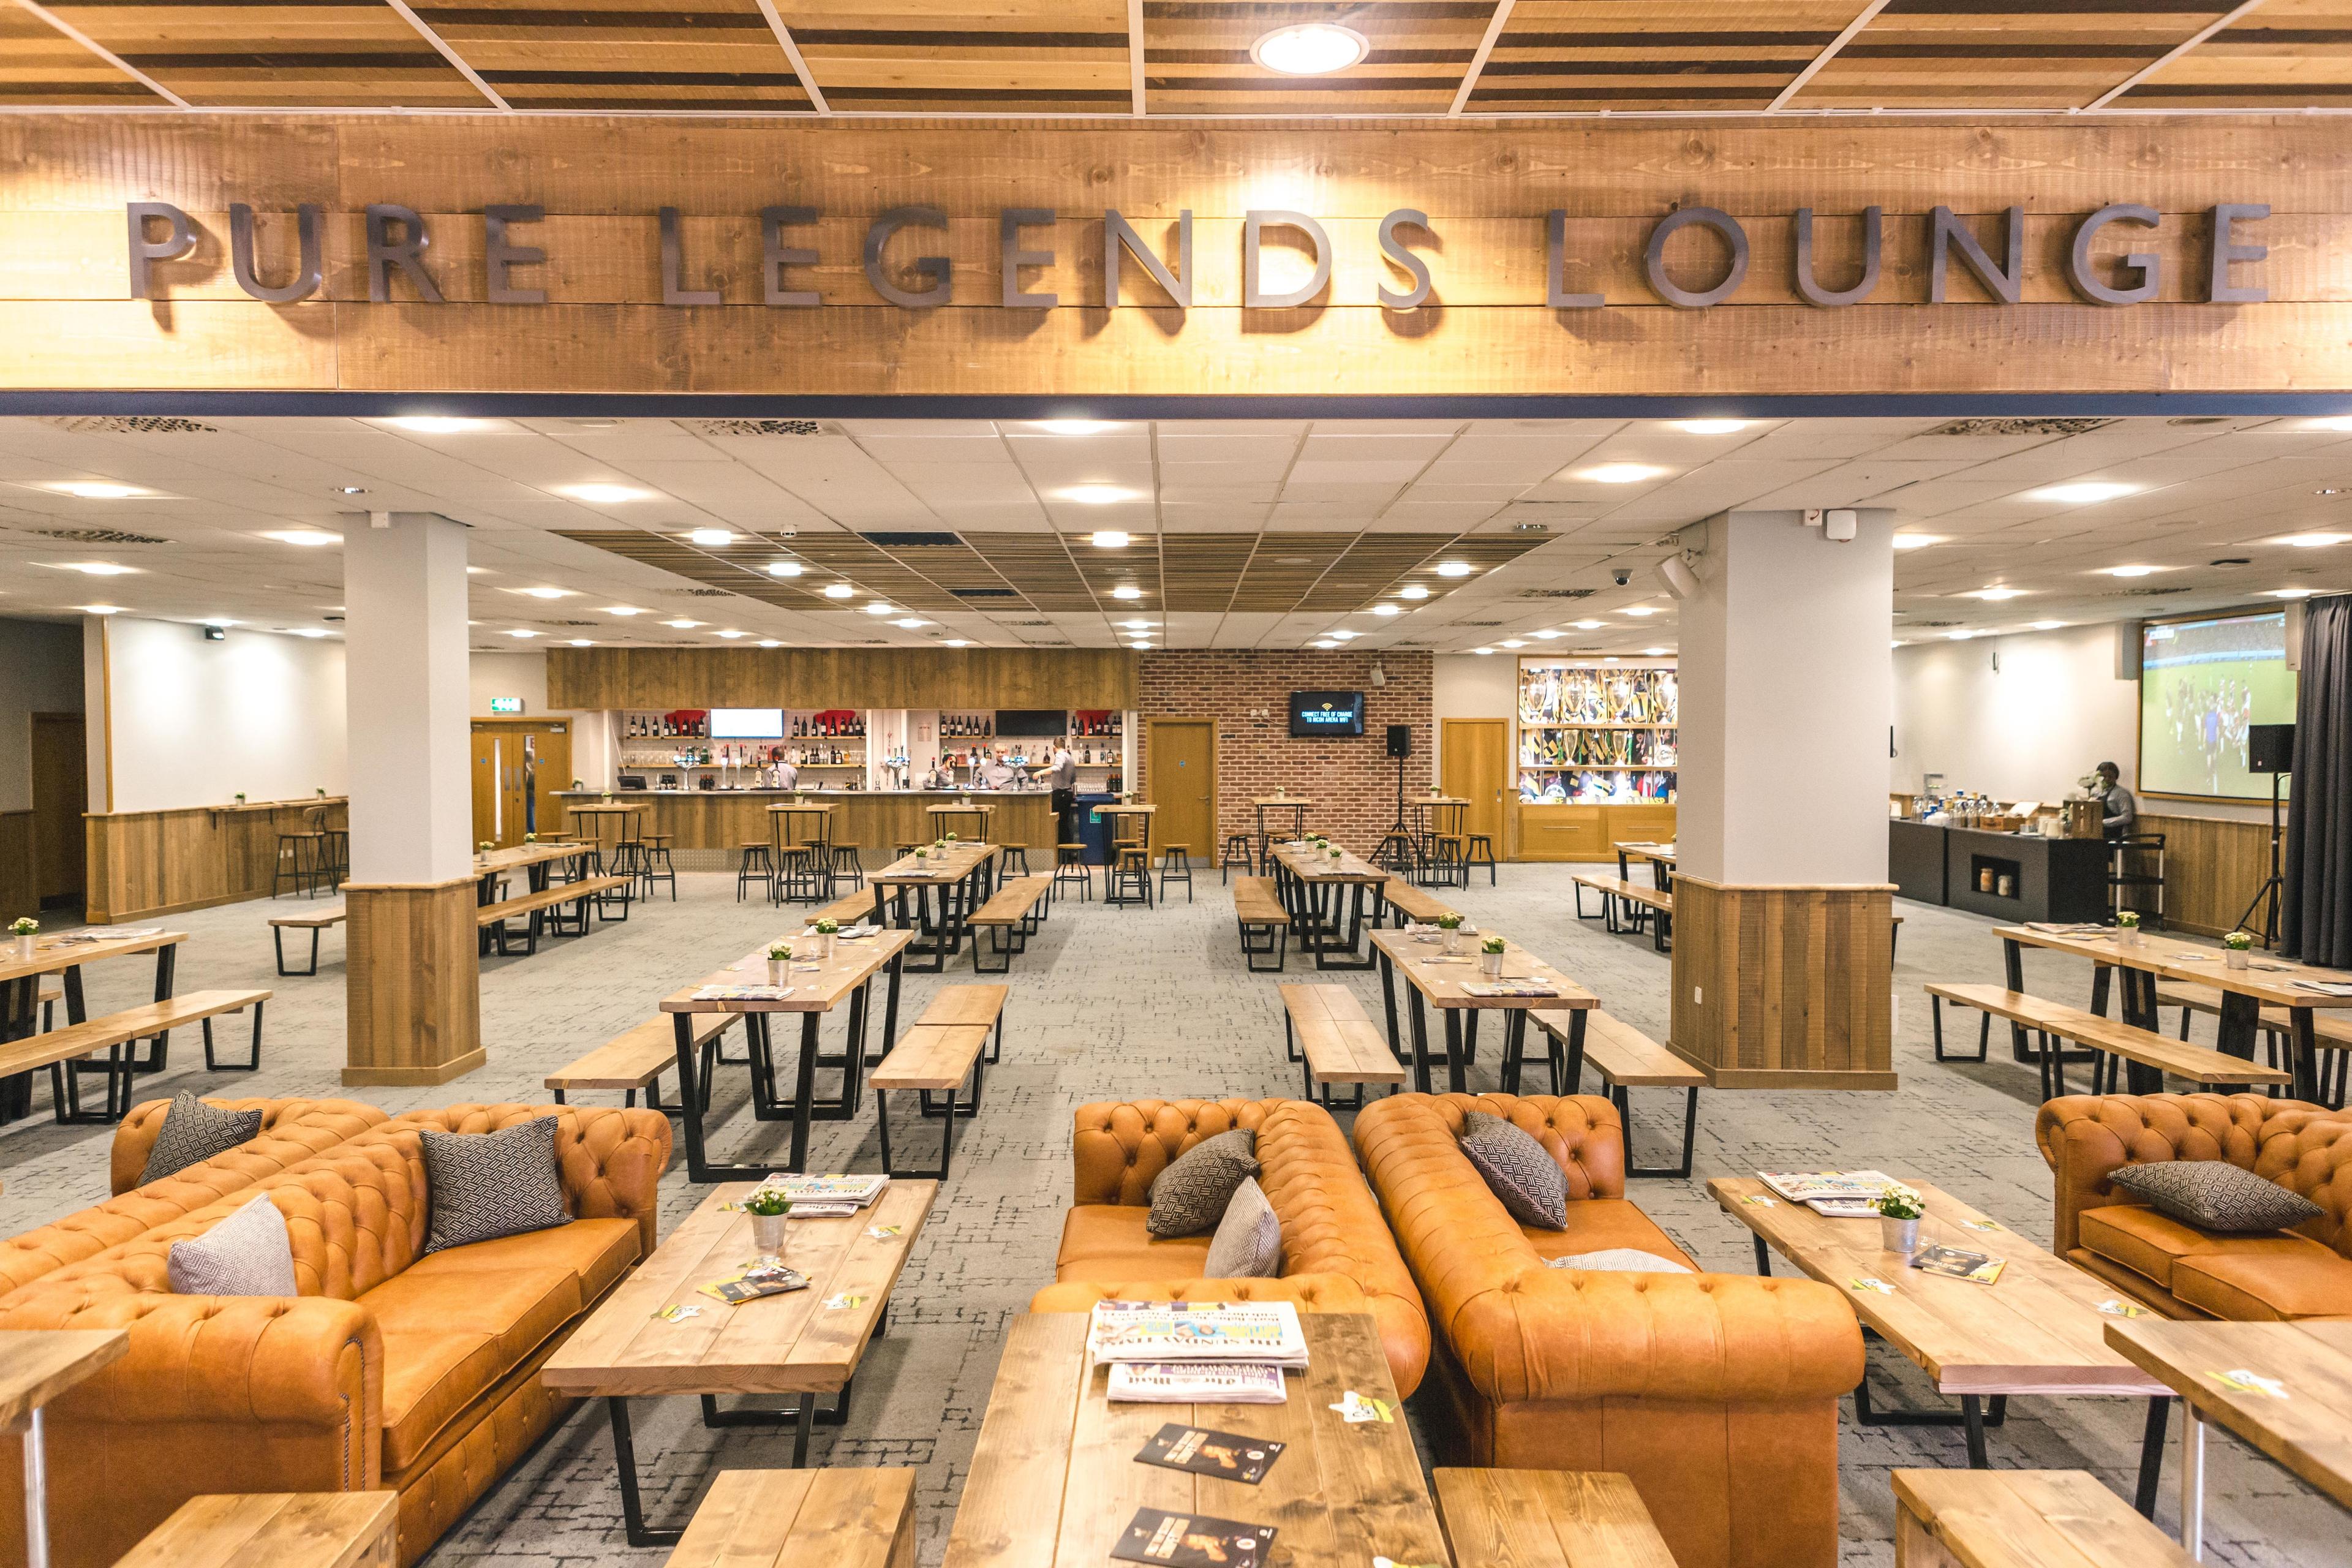 Pure Legends Lounge, Coventry Building Society Arena photo #1